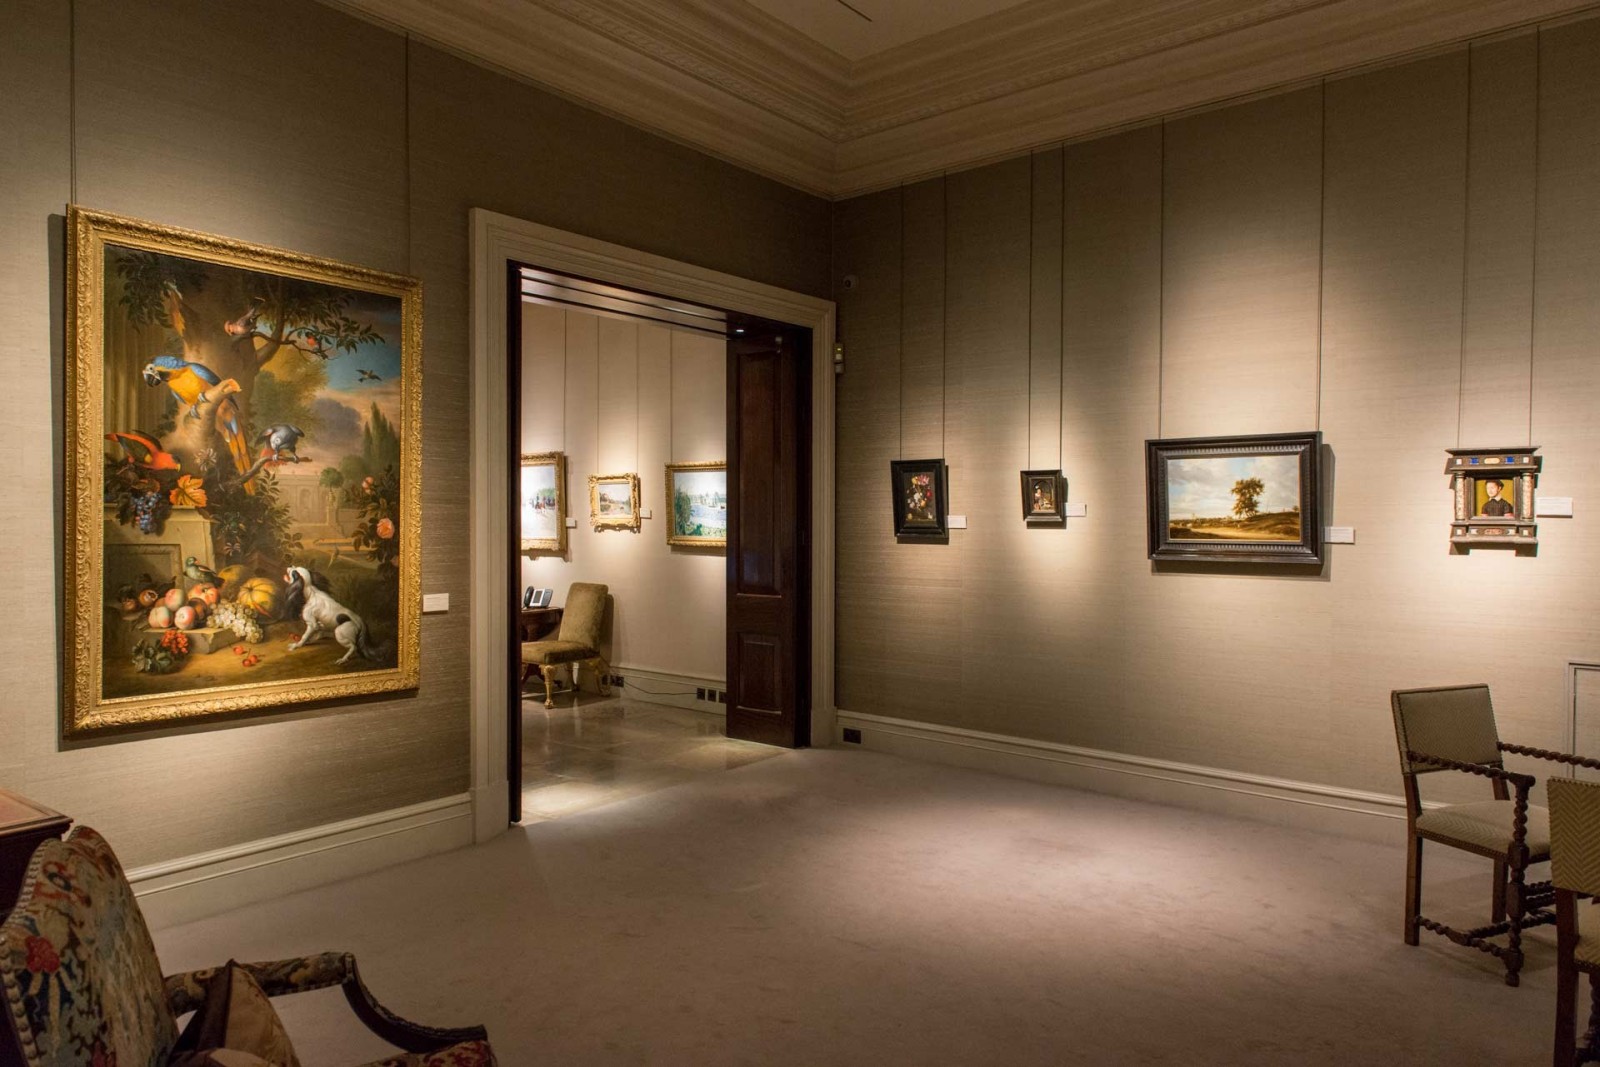 Five centuries of master paintings at 147 New Bond Street